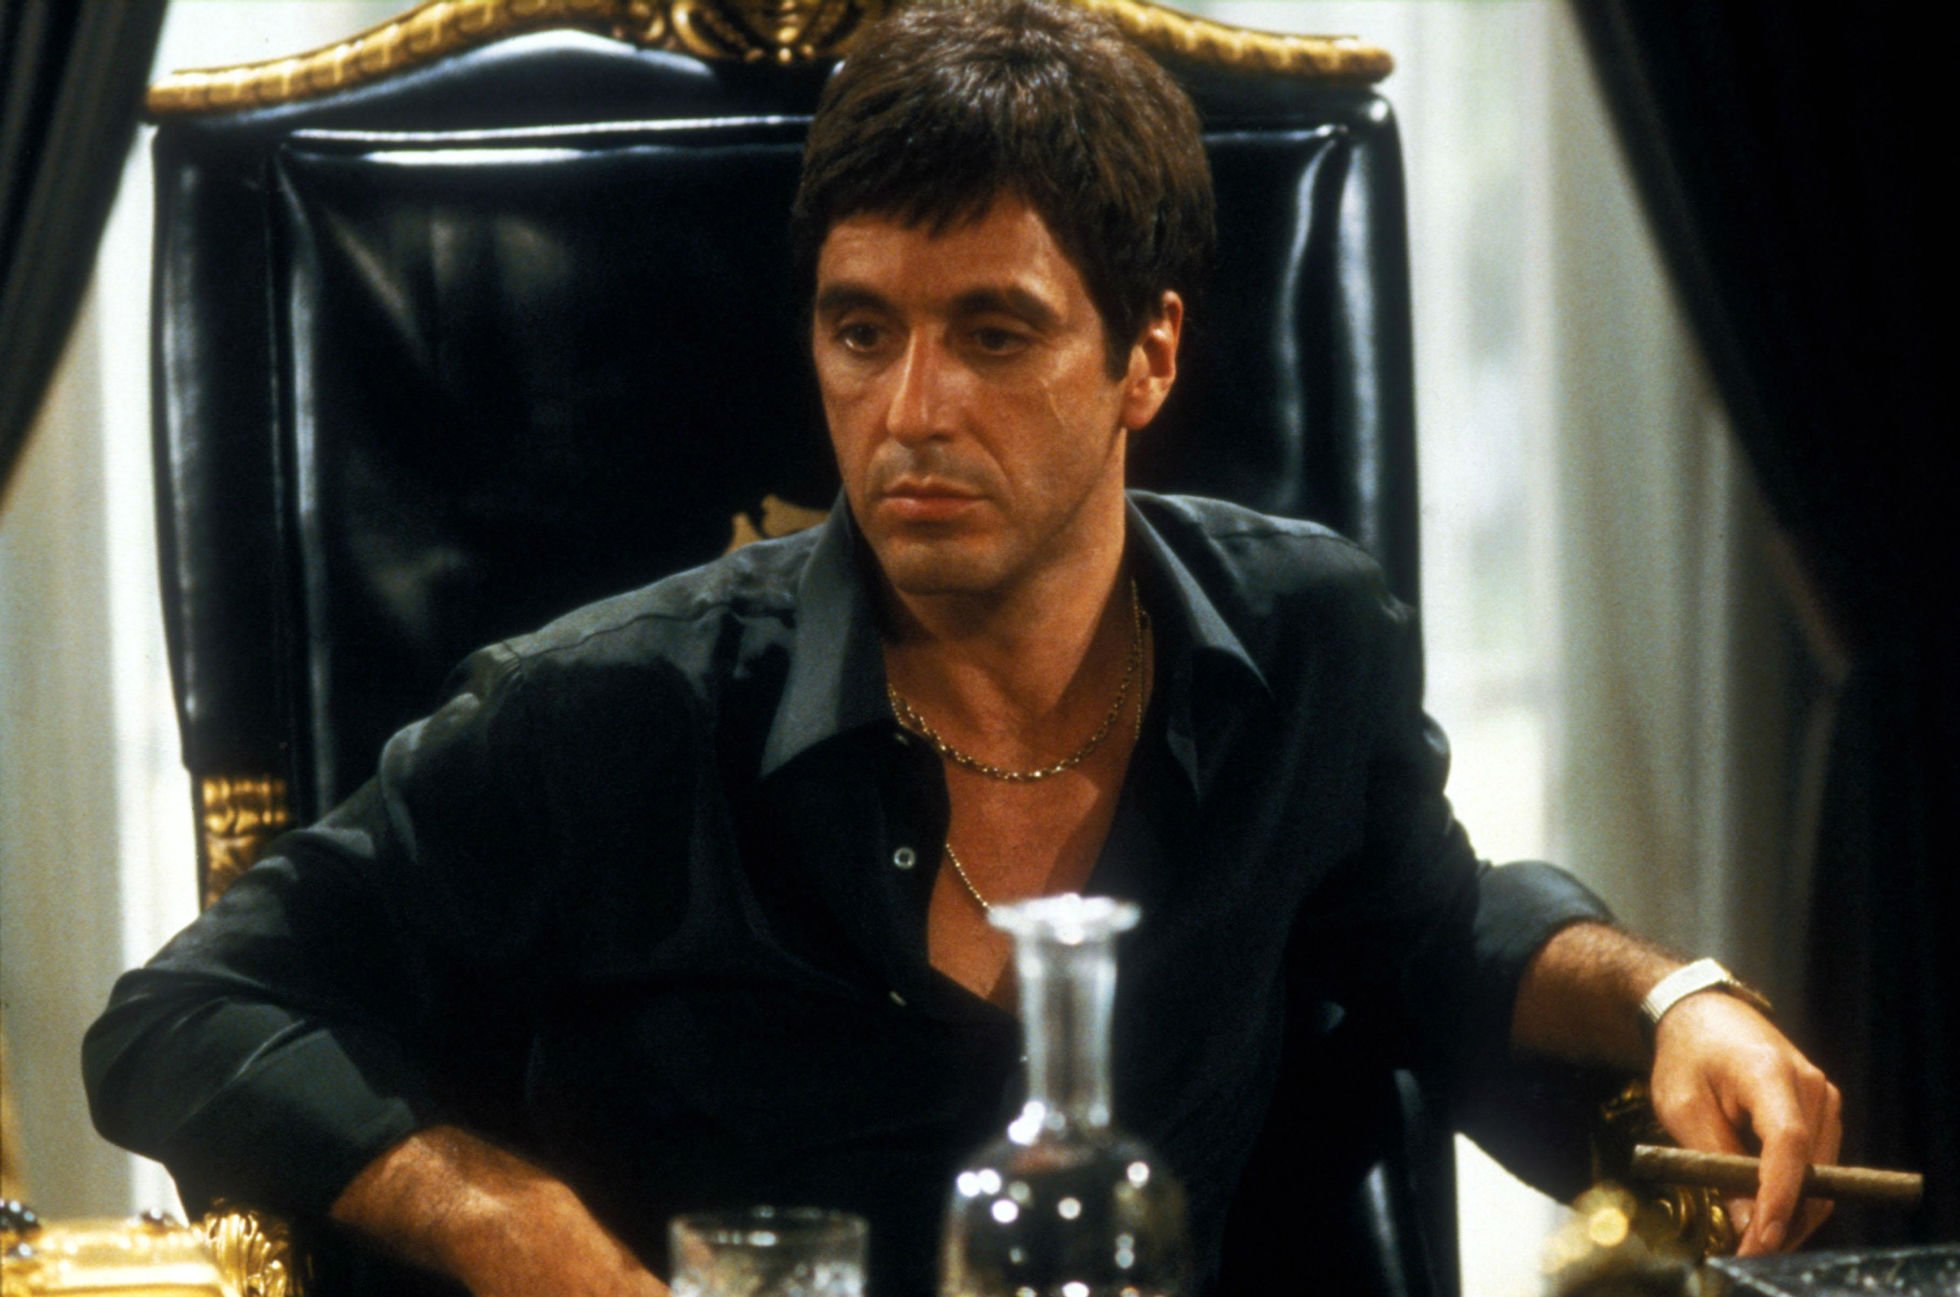 Scarface - Bad Guy Scarface Quotes. QuotesGram / Don't expect an ...